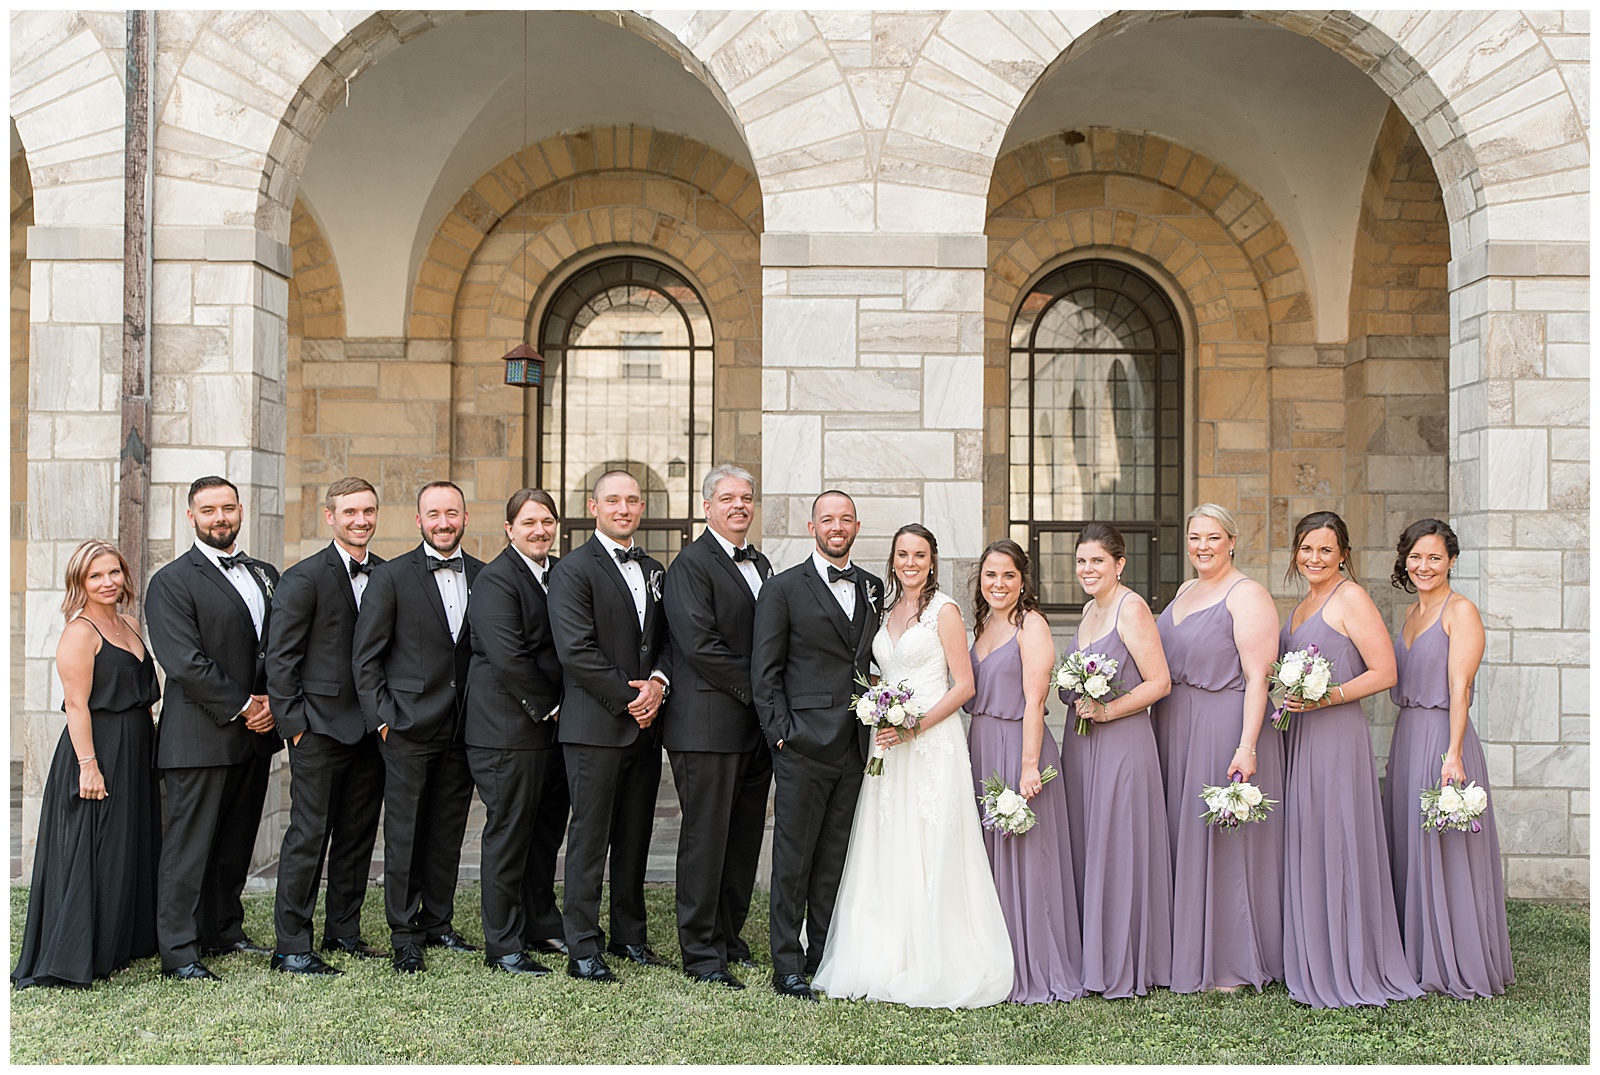 bridal party smiling at camera in front of stone arches